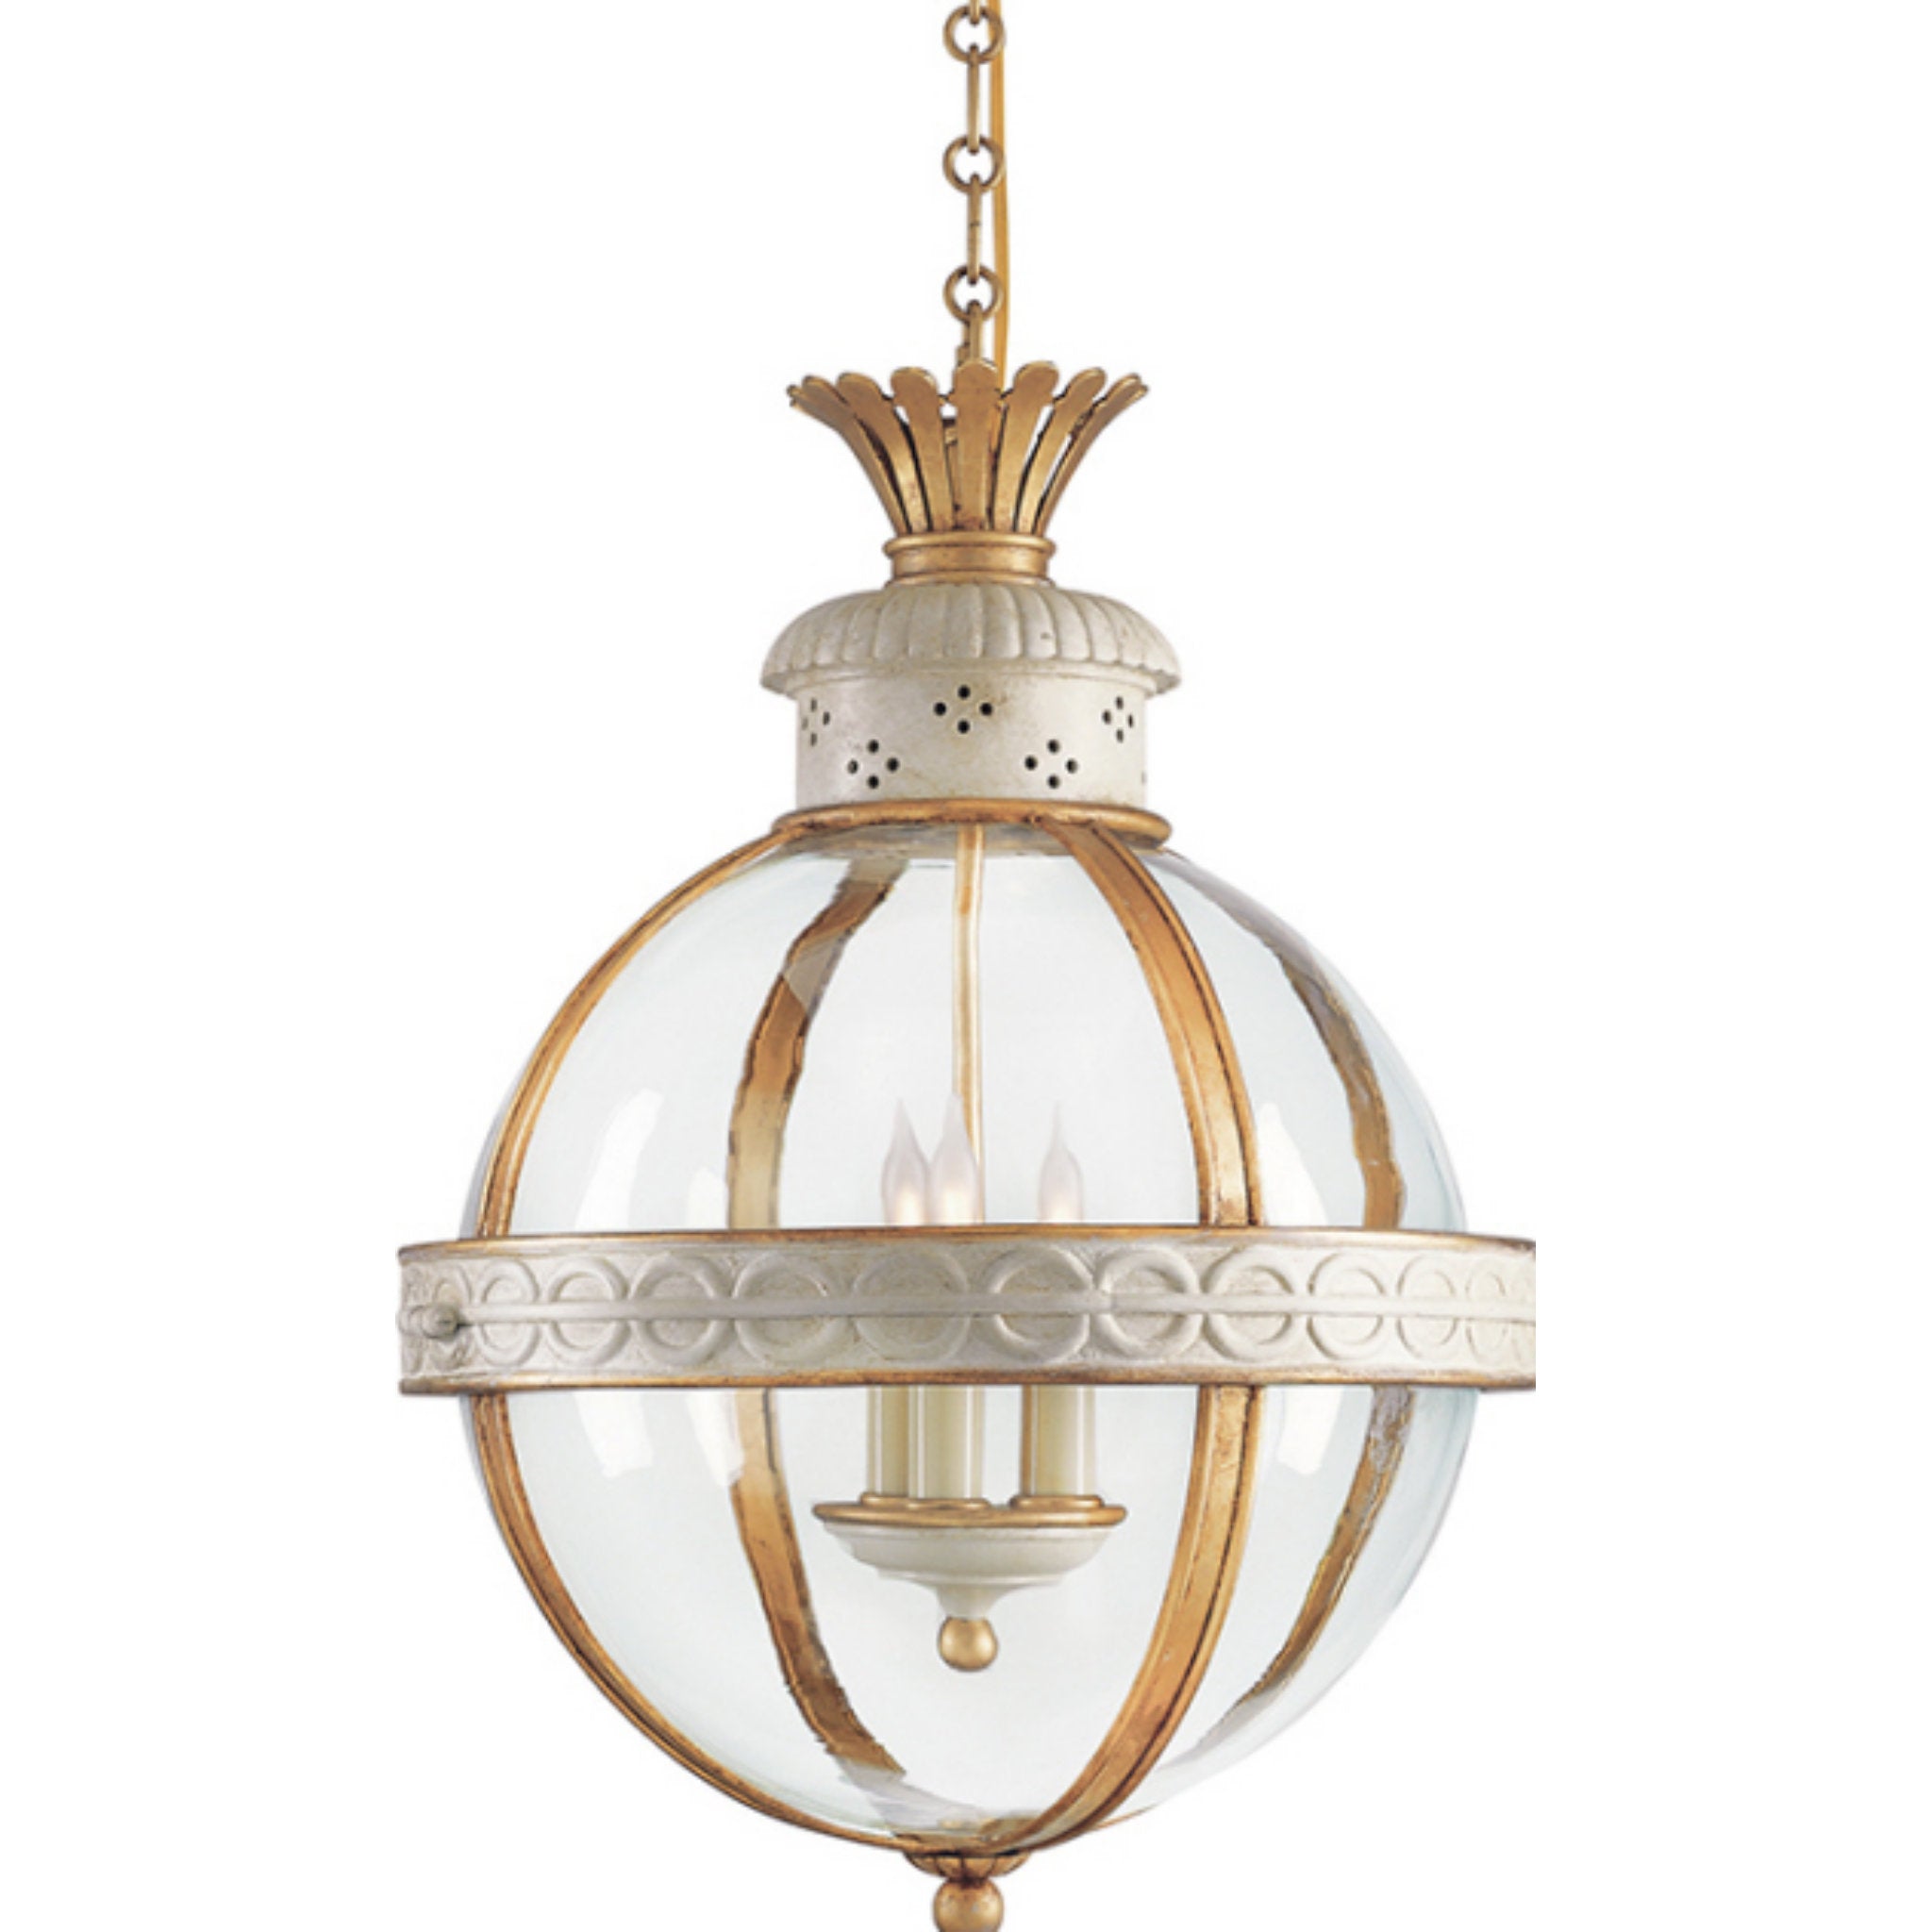 Chapman & Myers Crown Top Banded Globe Lantern in Antique White with C